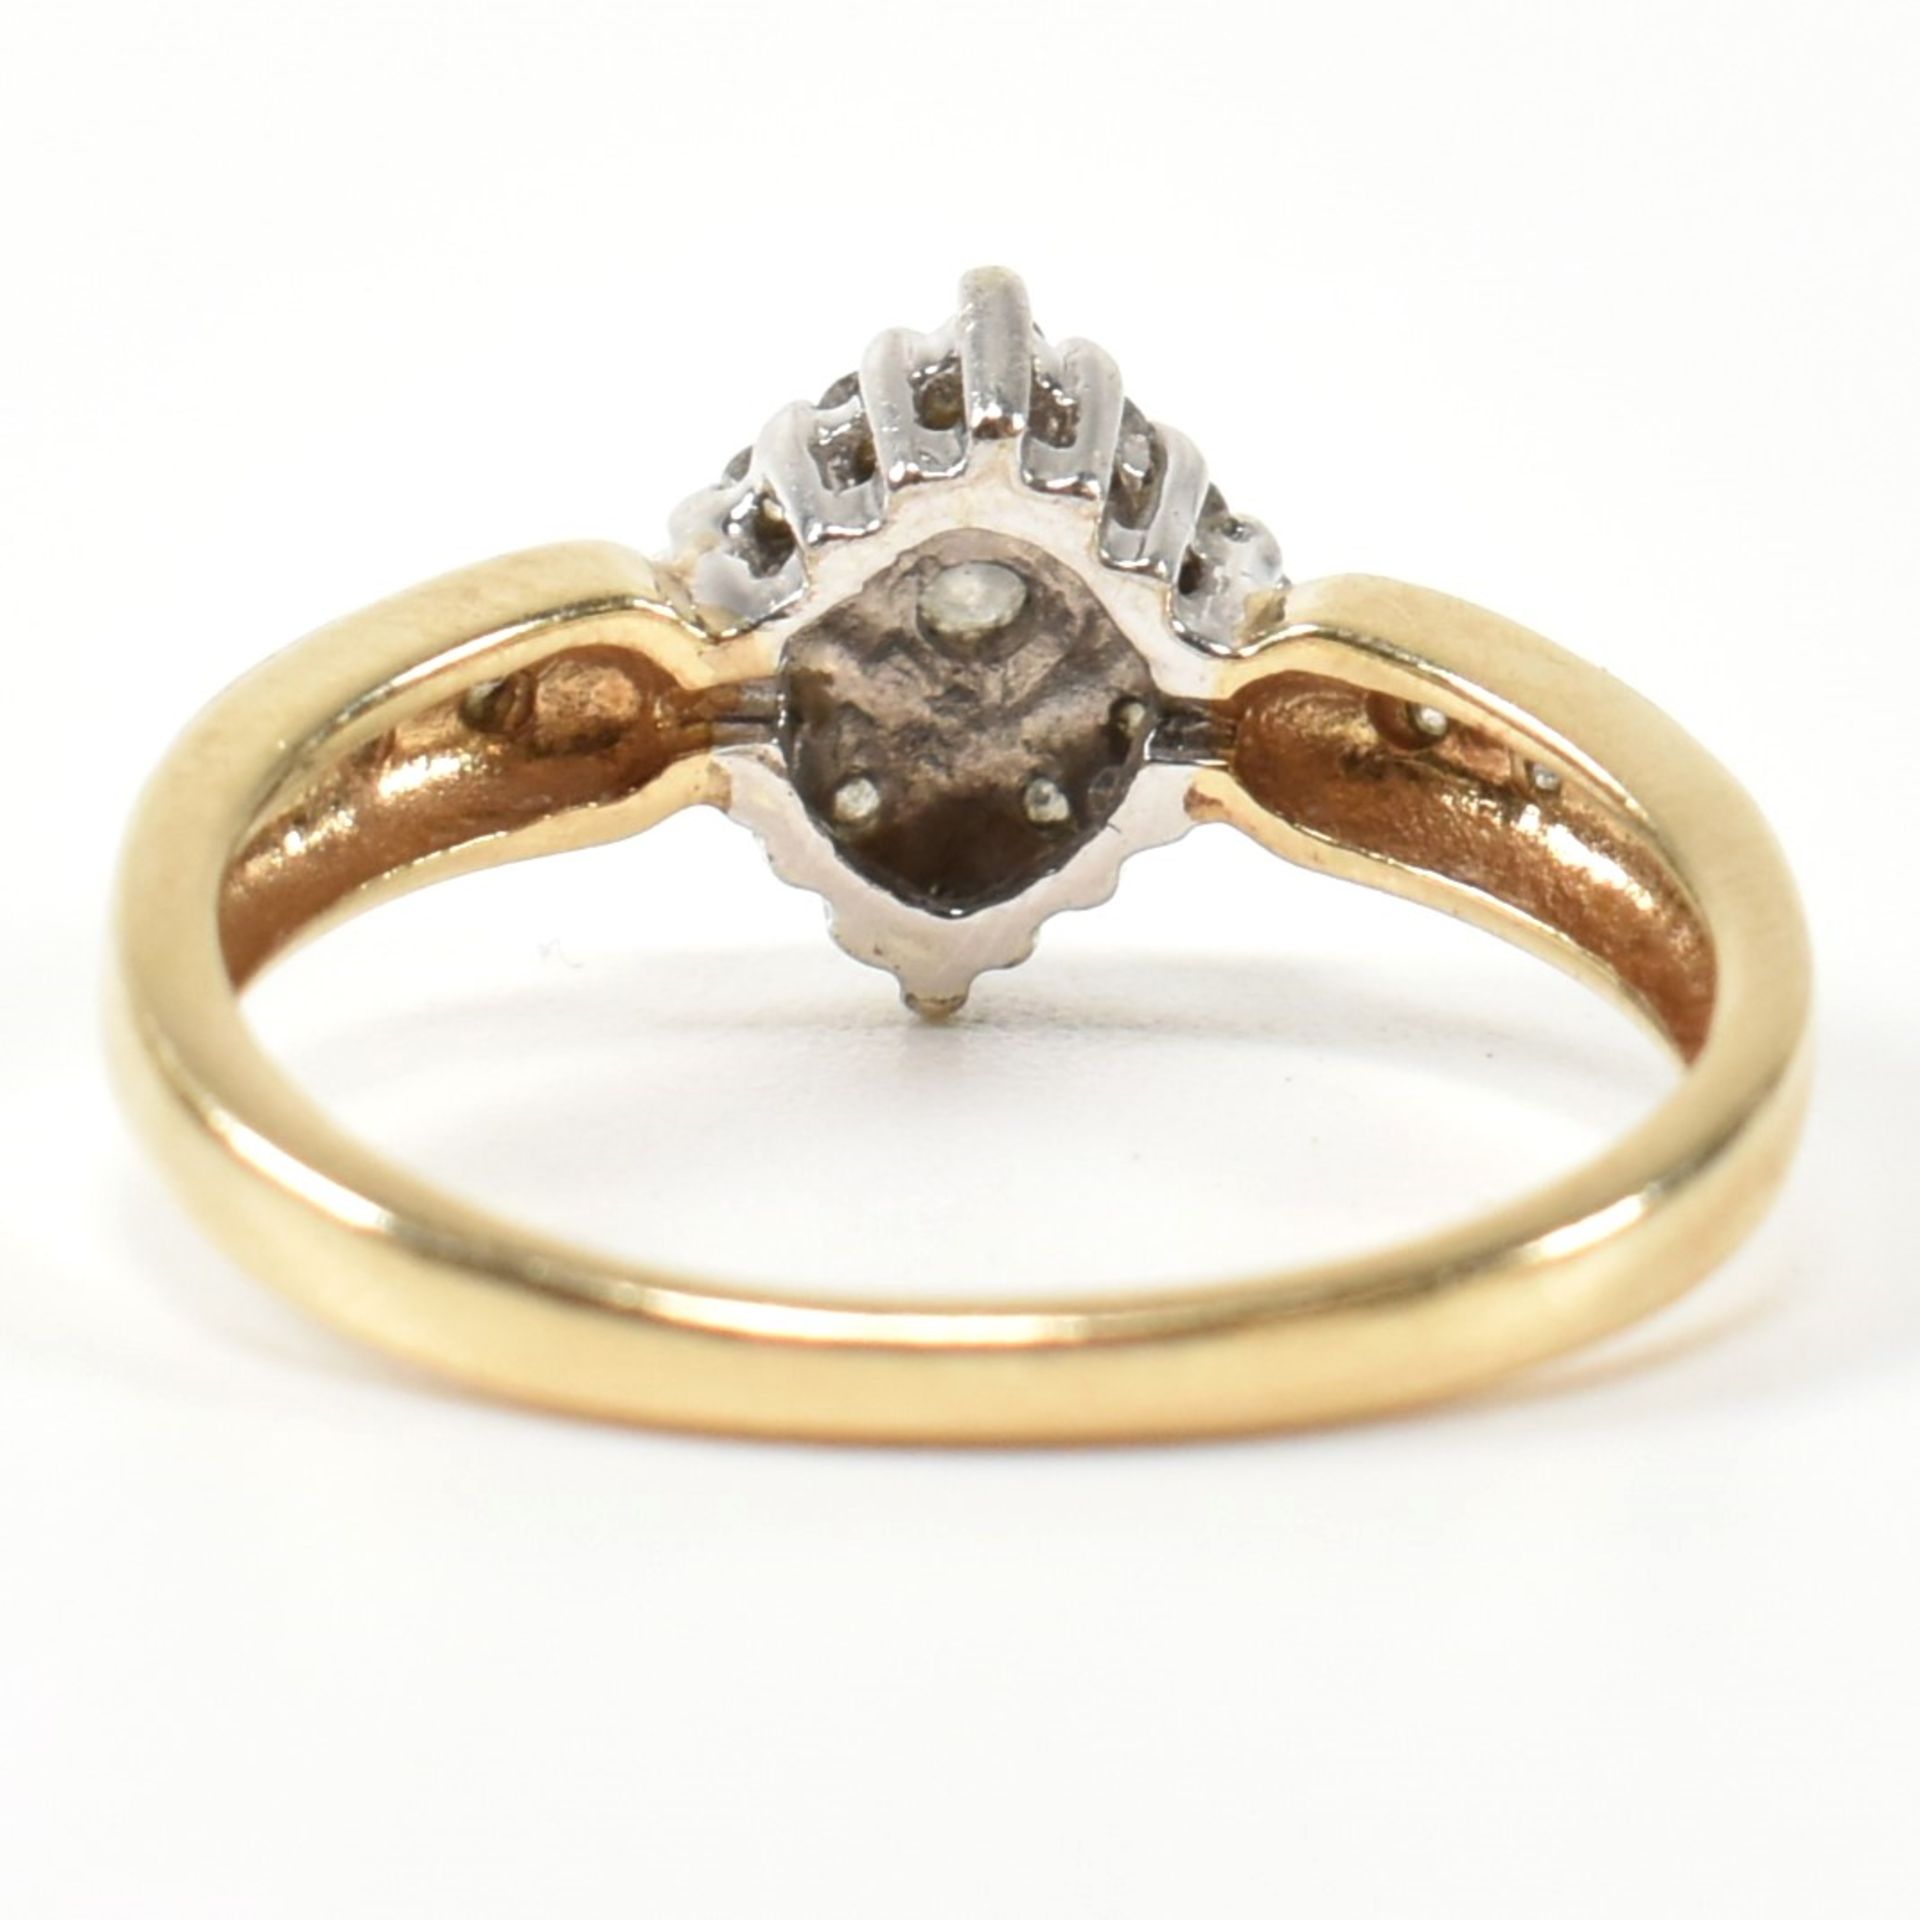 HALLMARKED 9CT GOLD & DIAMOND CLUSTER RING - Image 2 of 9